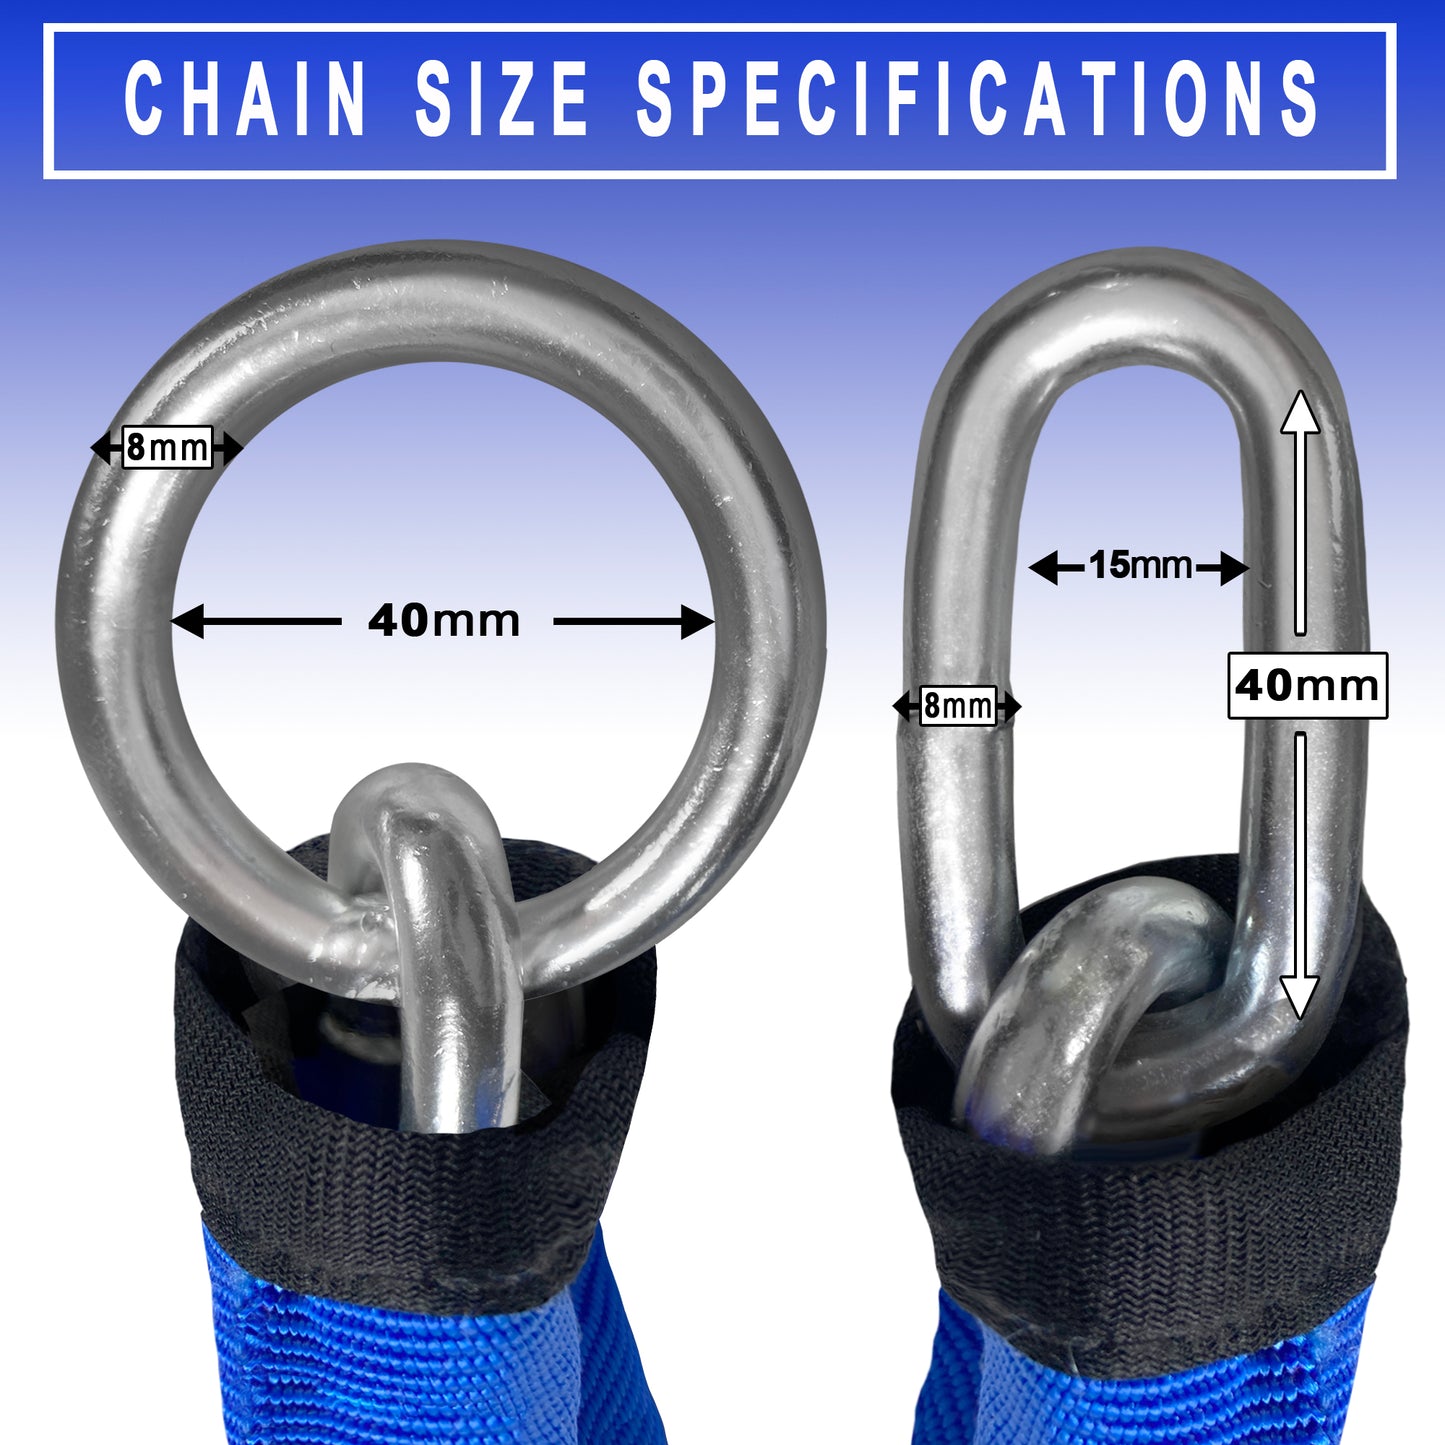 DocksLocks® Heavy Duty Cinch Style 8mm Security Chain - (3ft, 6ft or 10ft) - Weatherproof and Cut Proof with Short Shackle U-Lock